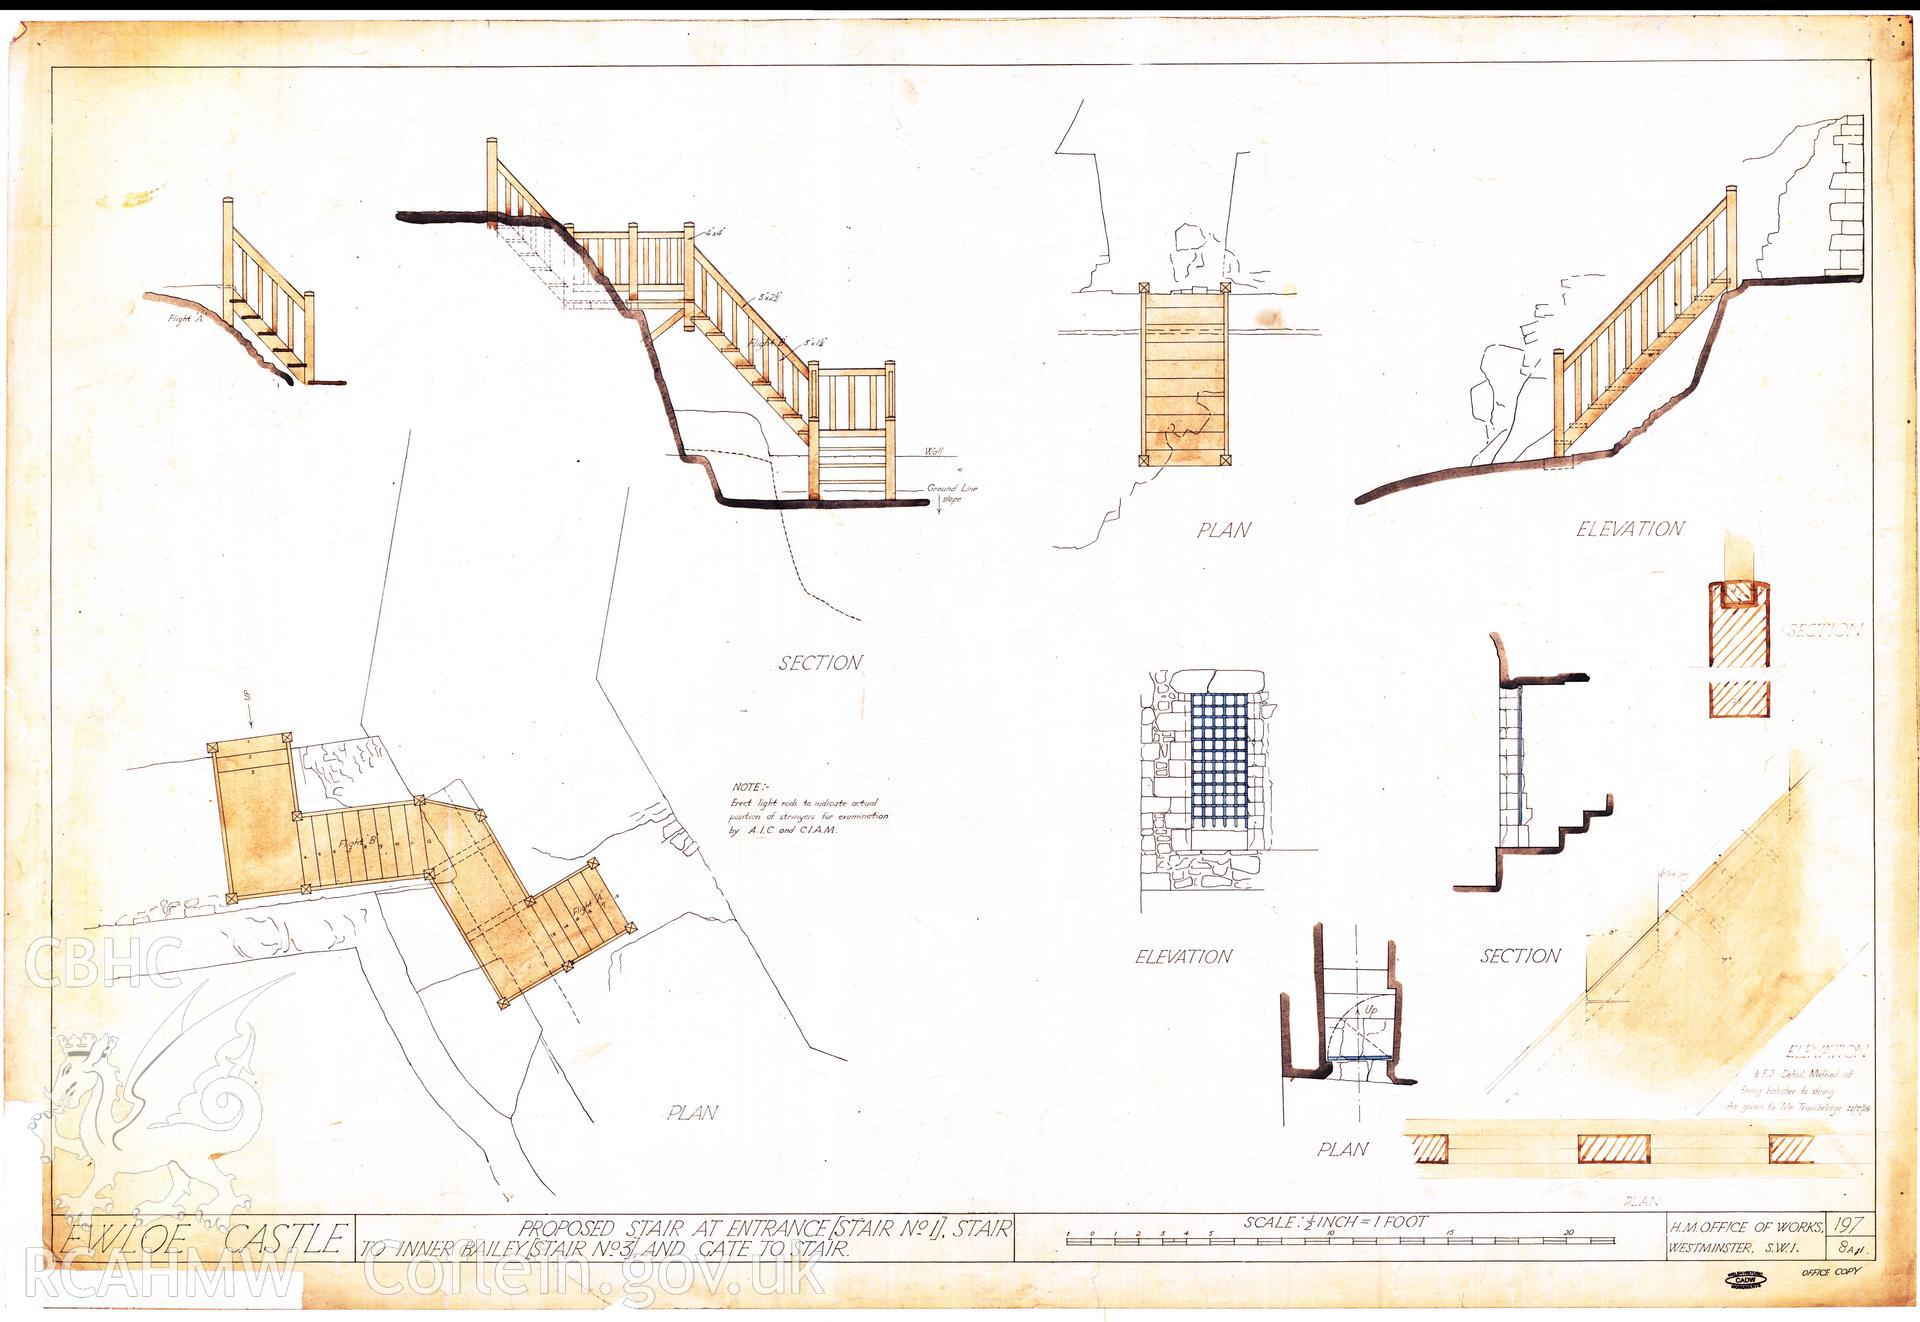 Cadw guardianship monument drawing of Ewloe Castle. Stairs 1+3 + grille. Cadw Ref. No:197/8A1. Scale 1:24.